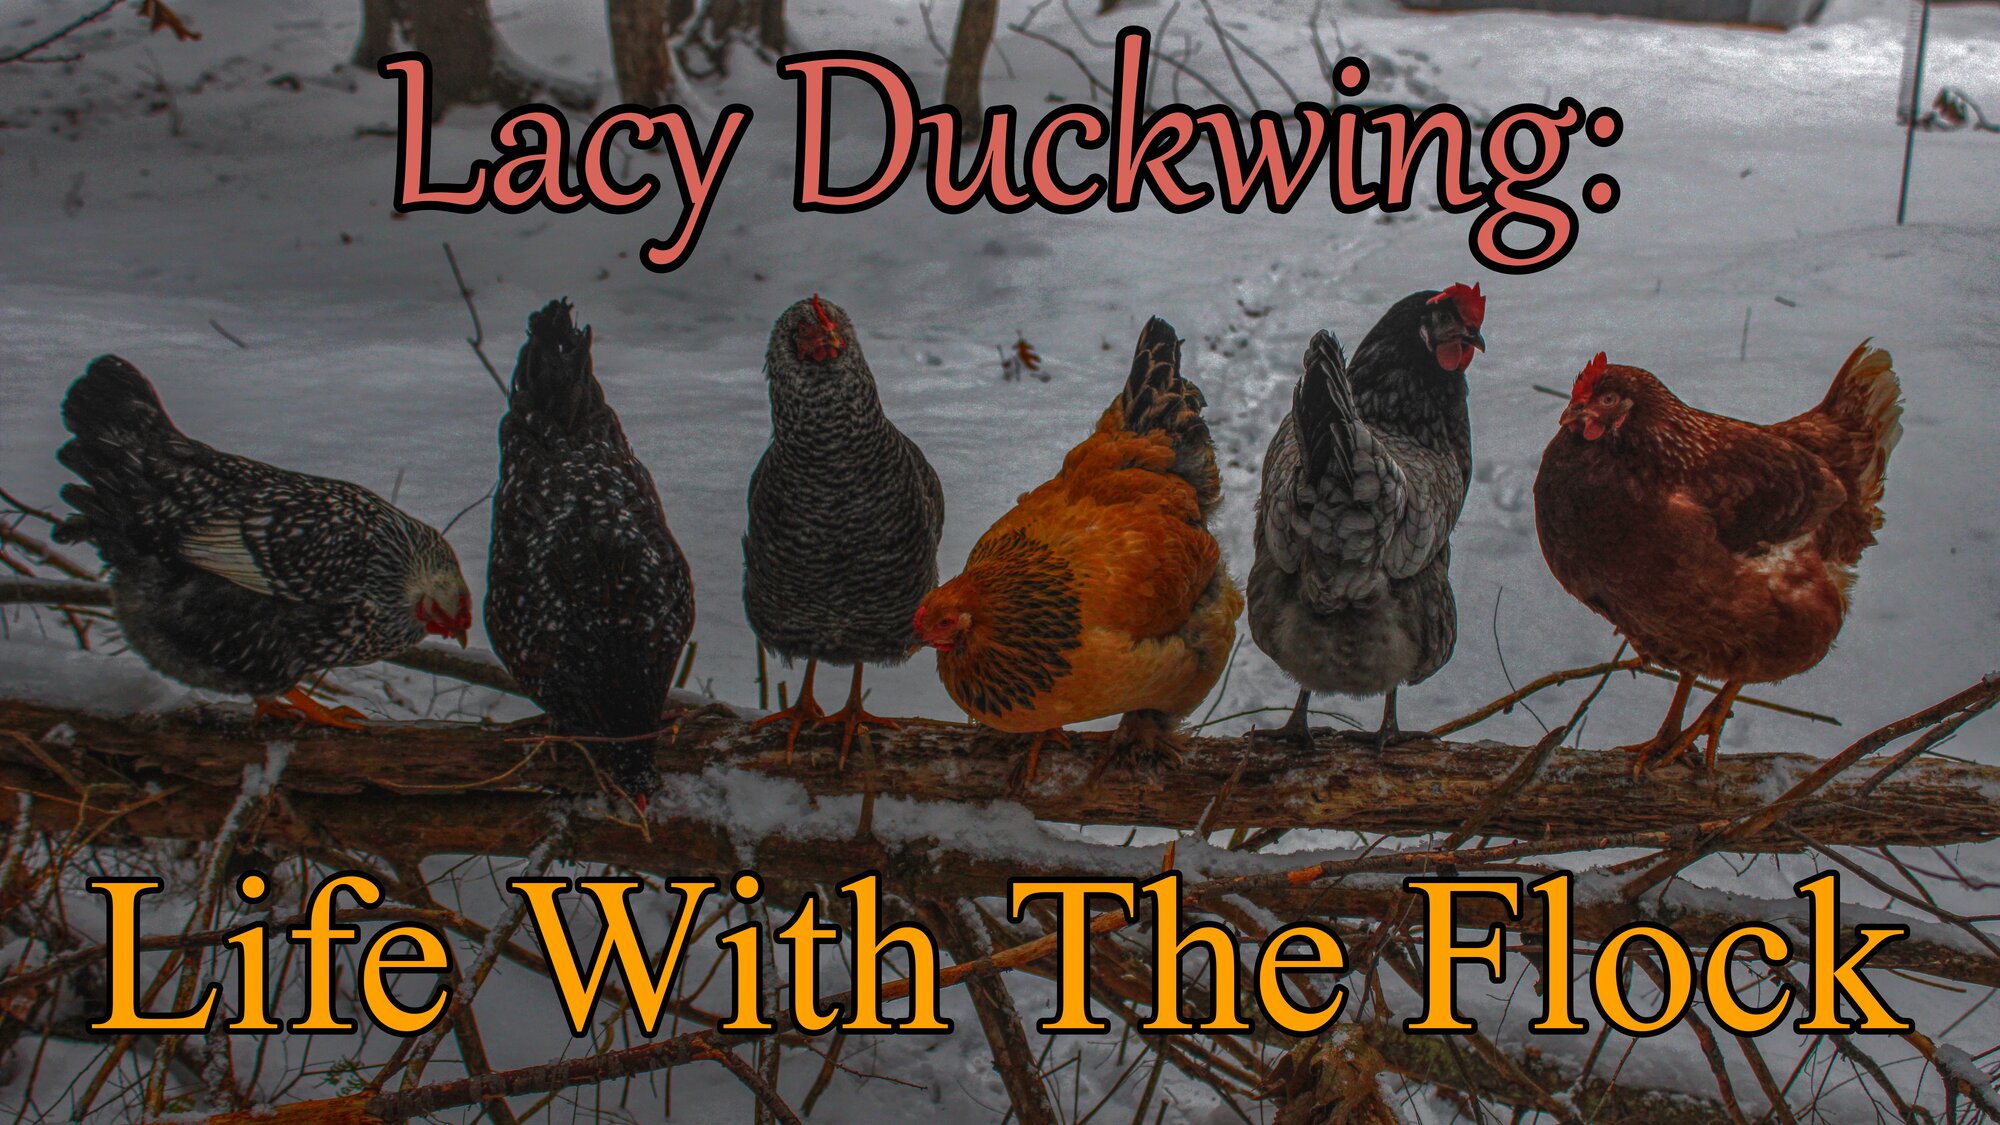 Lacy Duckwing Life With The Flock.JPG